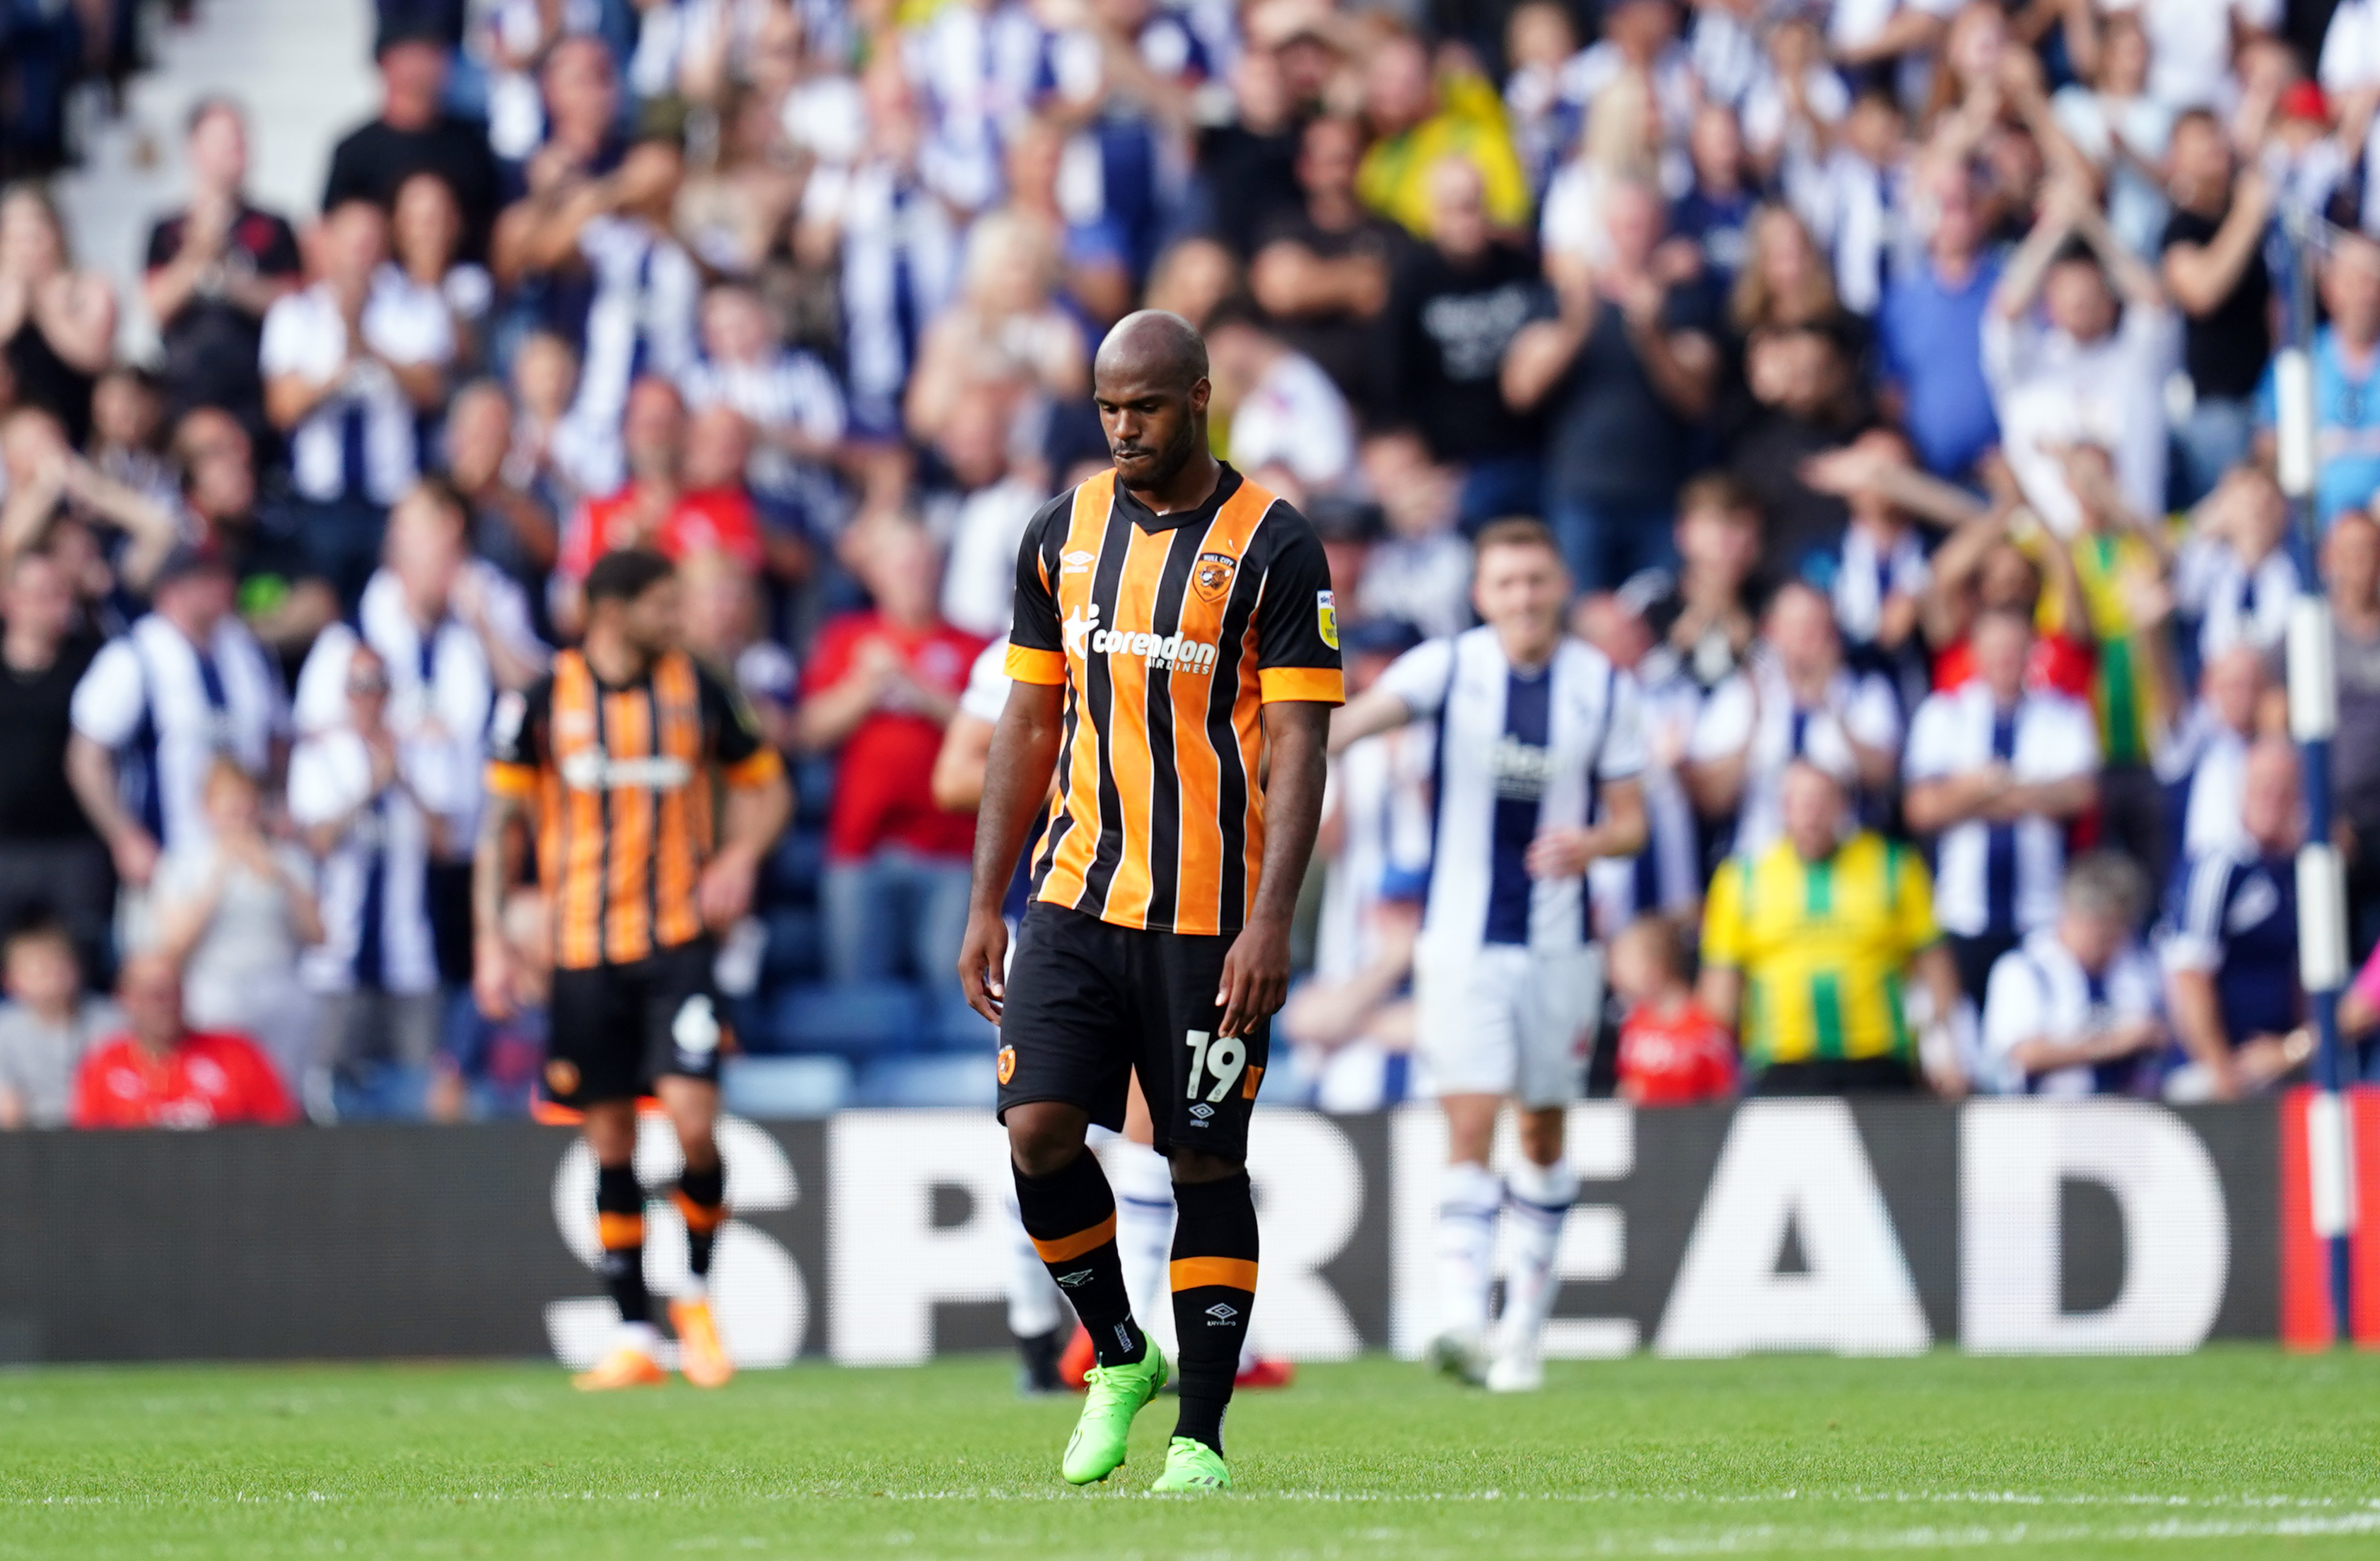 West Bromwich Albion v Hull City - Sky Bet Championship - The Hawthorns